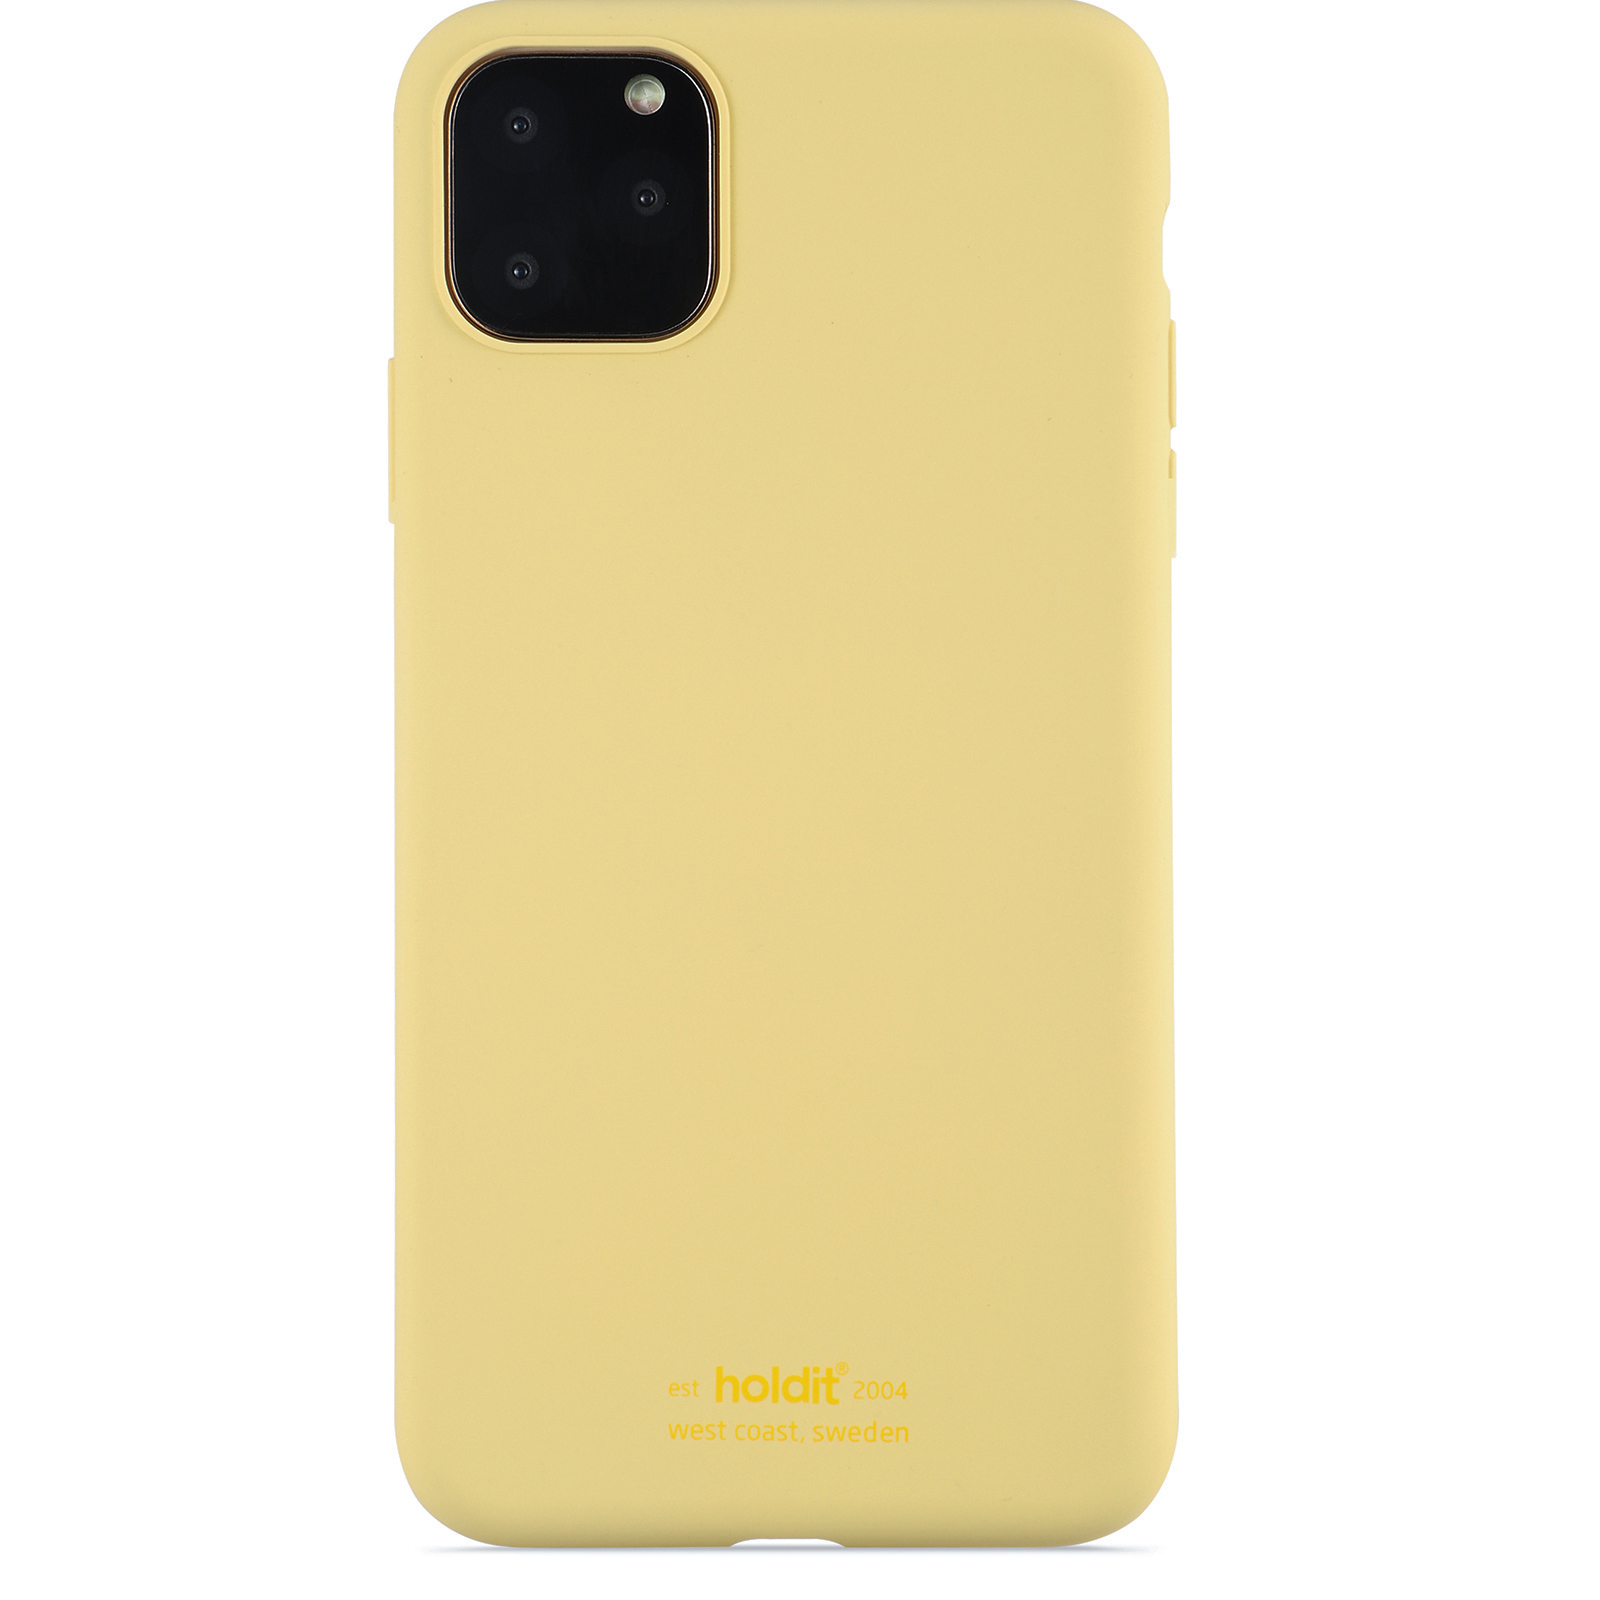 iPhone 11 Pro Max, case silicone, yellow